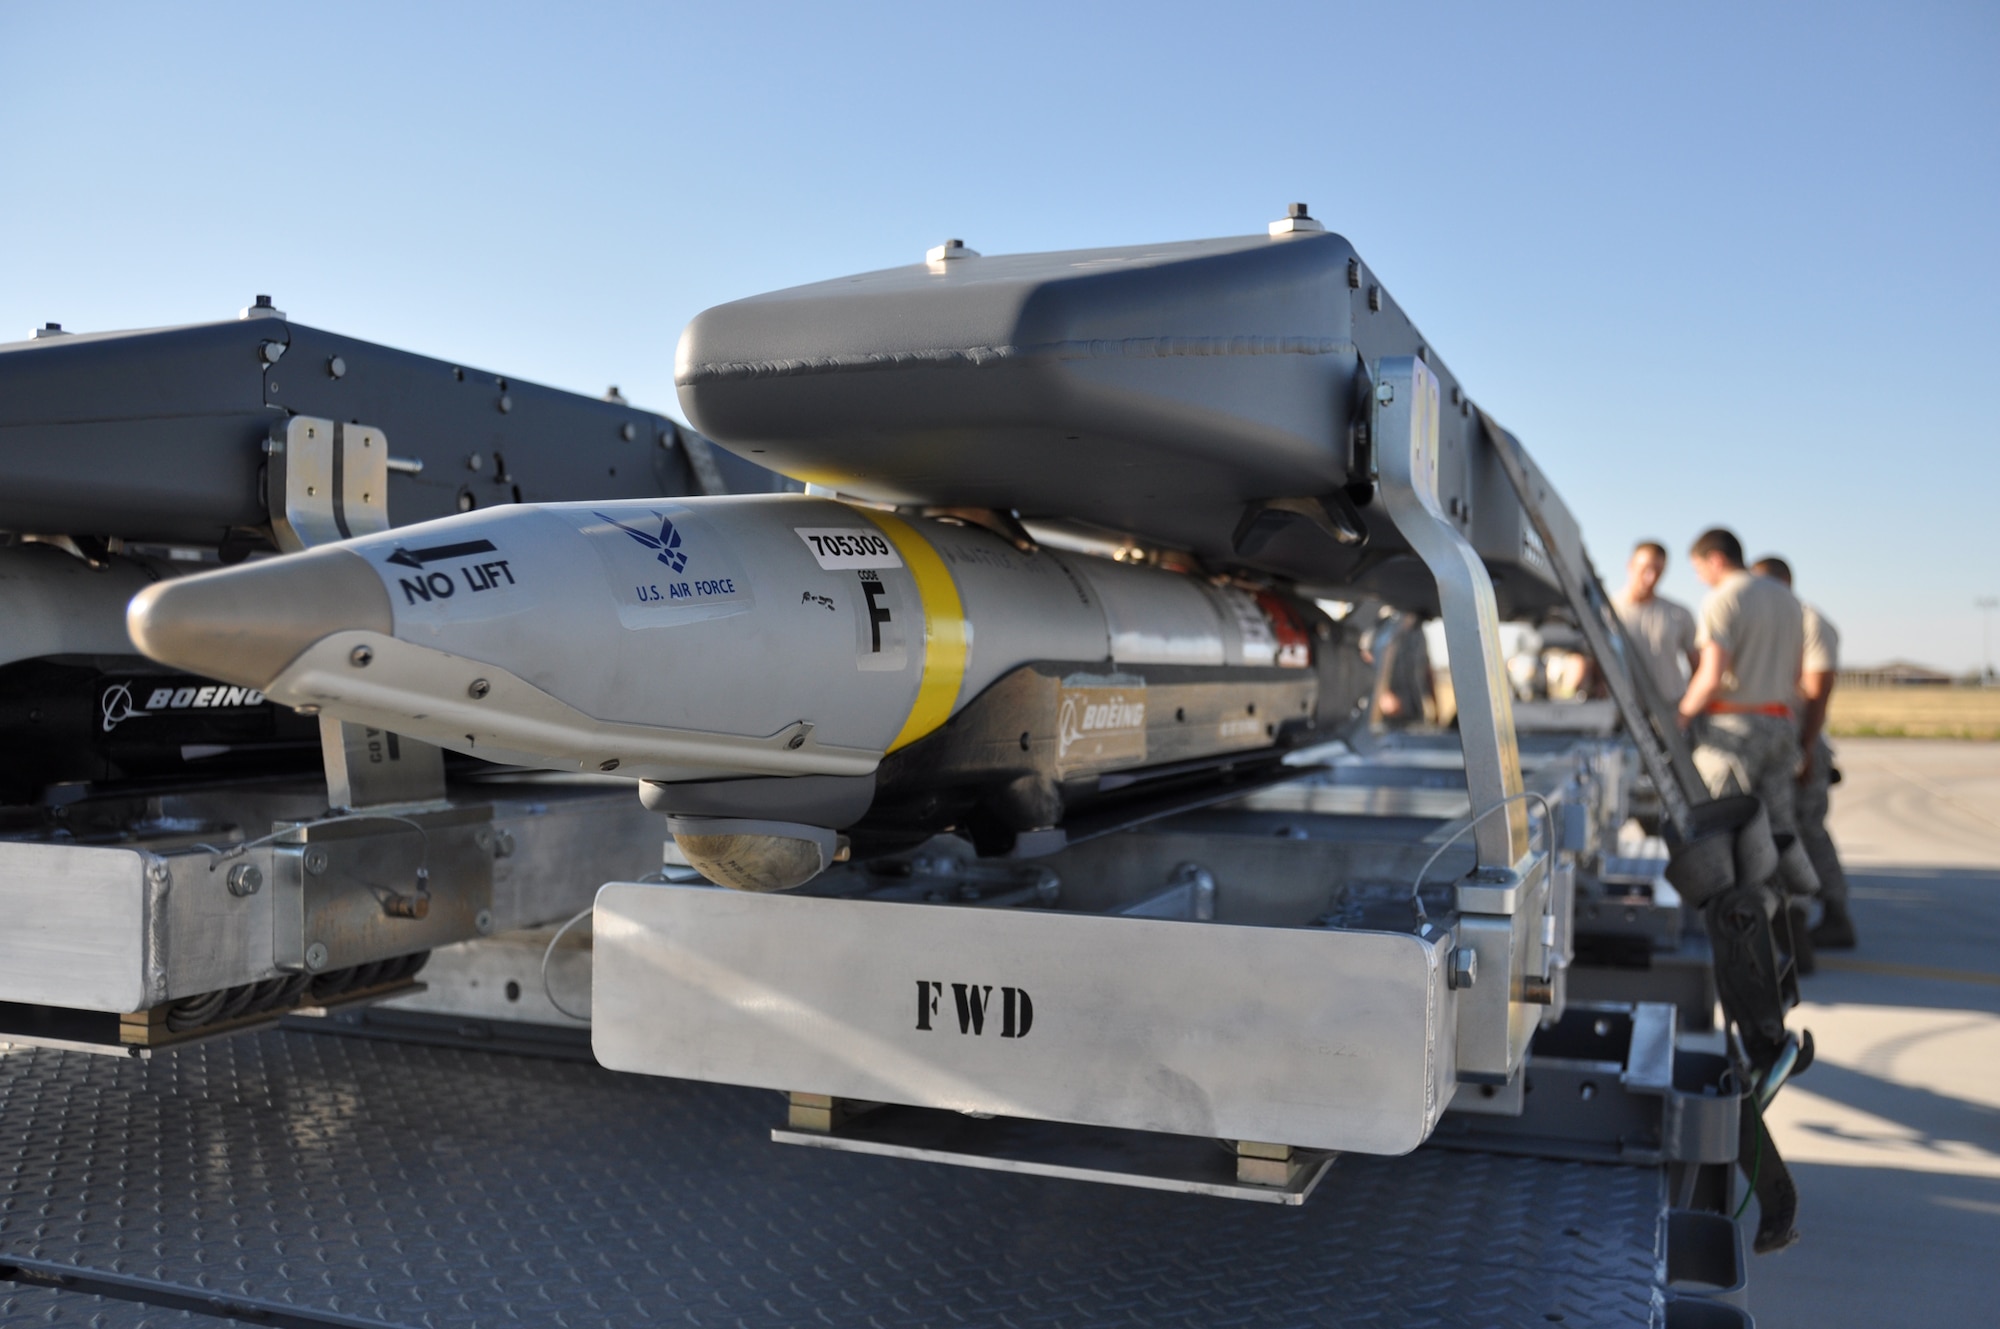 Members of the 3rd Wing and the 477th Fighter Group prepare to load a GBU-39 on to an F-22 during Combat Hammer at Hill AFB. The GBU-39 is a 250-pound precision-guided glide bomb that is intended to provide aircraft with the ability to carry a higher number of bombs. (U.S. Air Force Photo/Tech. Sgt. Dana Rosso)

